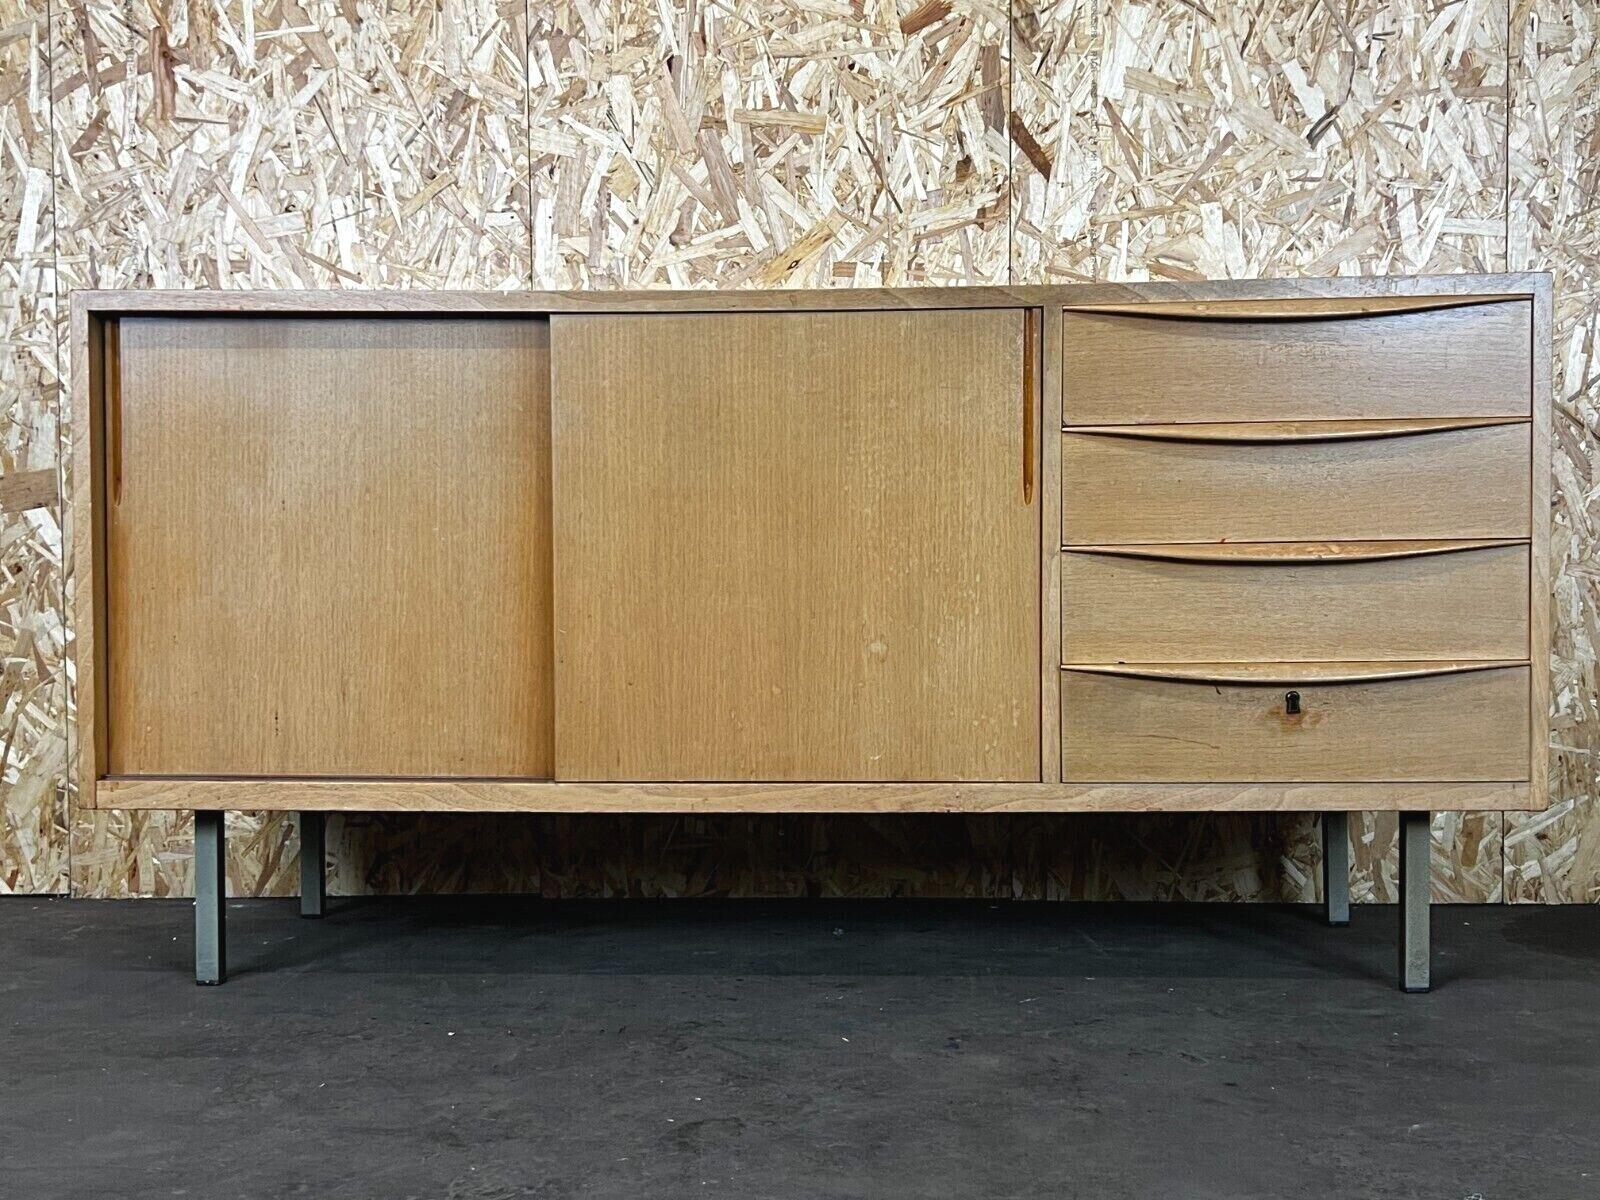 60s 70s sideboard credenza cabinet Danish Modern Design Denmark 70s

Object: sideboard

Manufacturer:

Condition: good - vintage

Age: around 1960-1970

Dimensions:

150cm x 50cm x 74cm

Other notes:

The pictures serve as part of